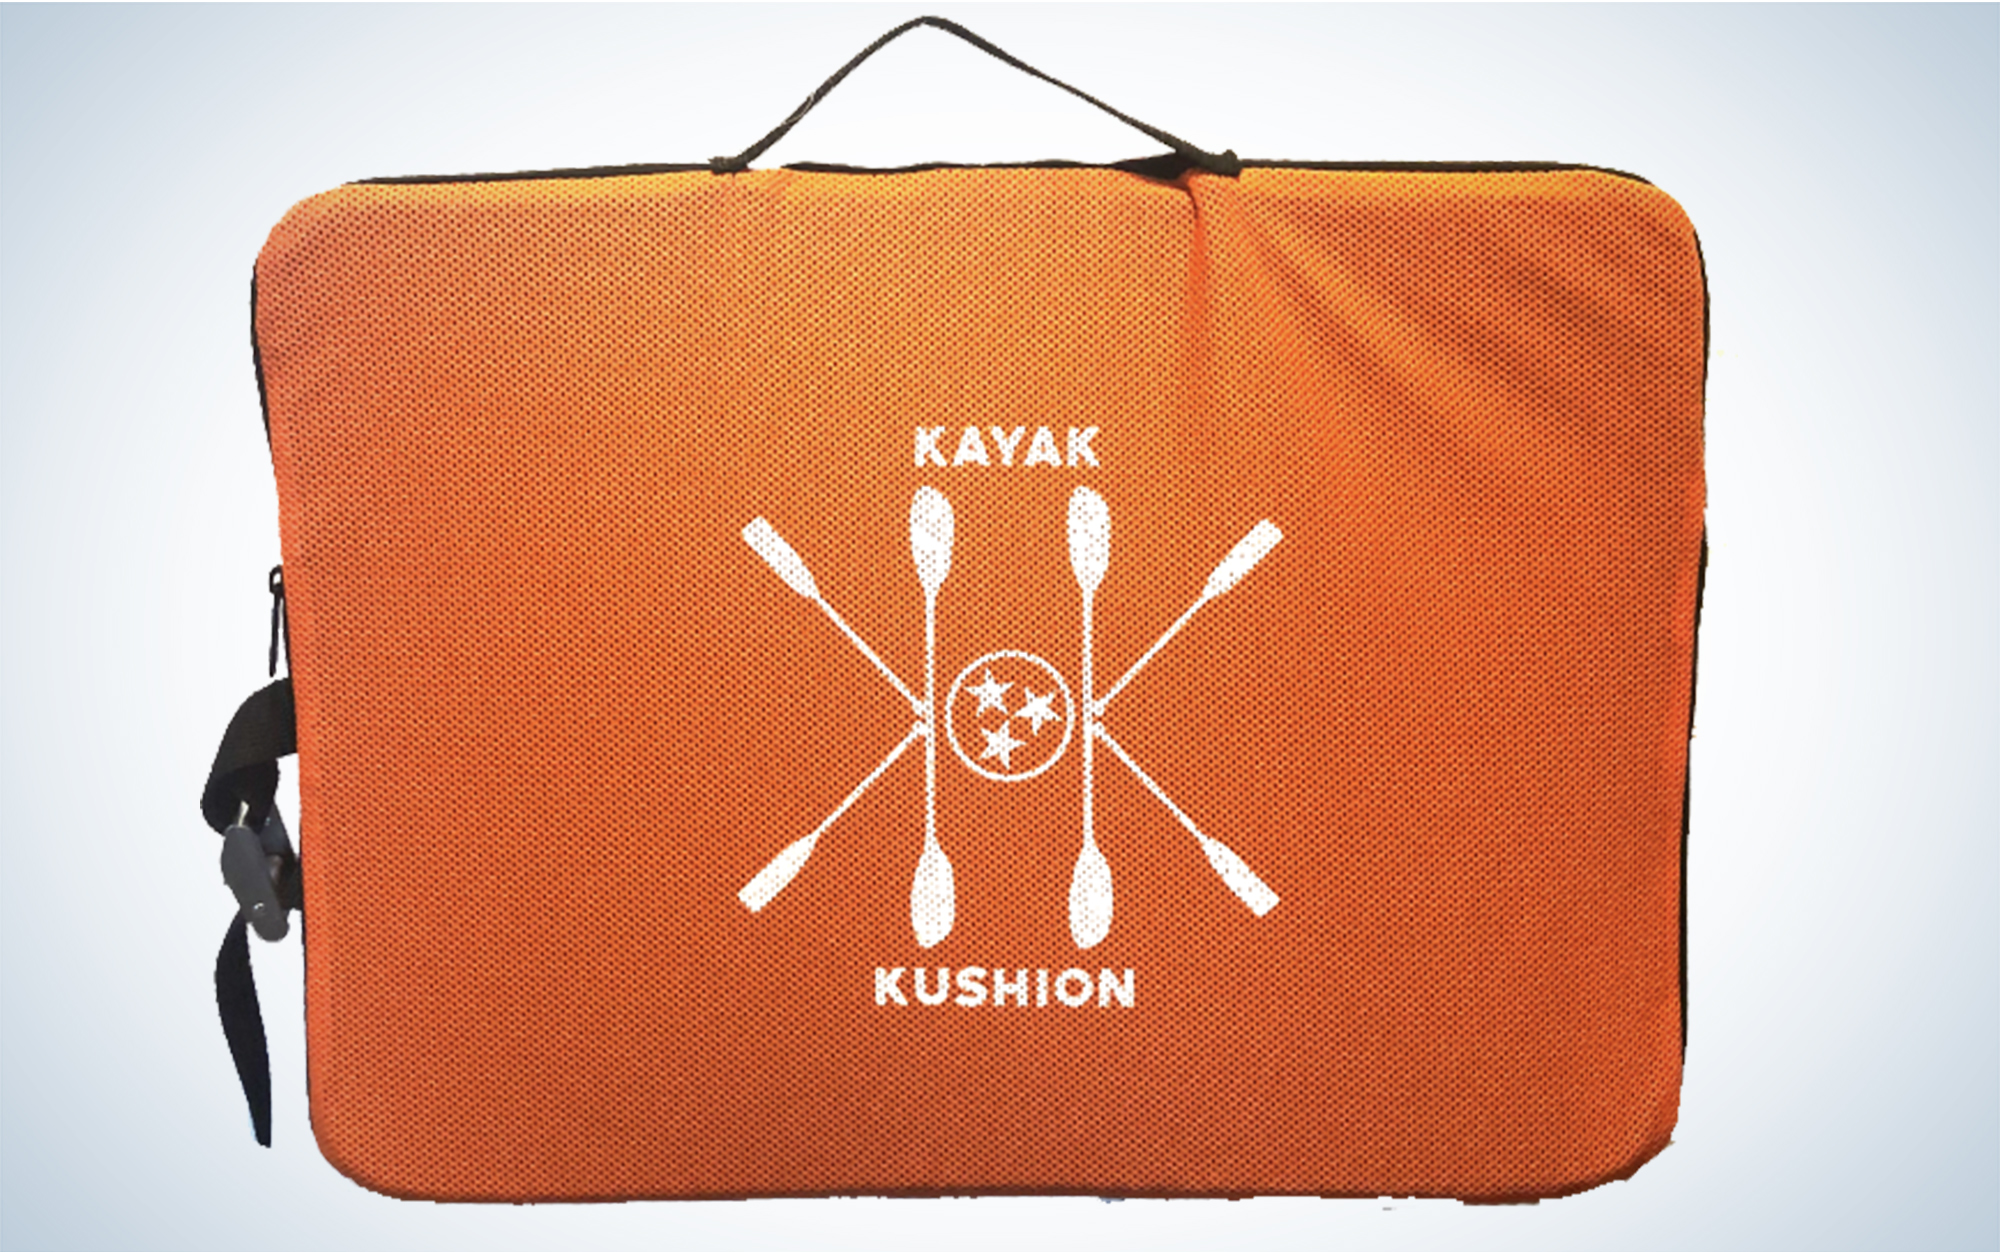 The Kayak Kushion is one of the best kayak fishing accessories.